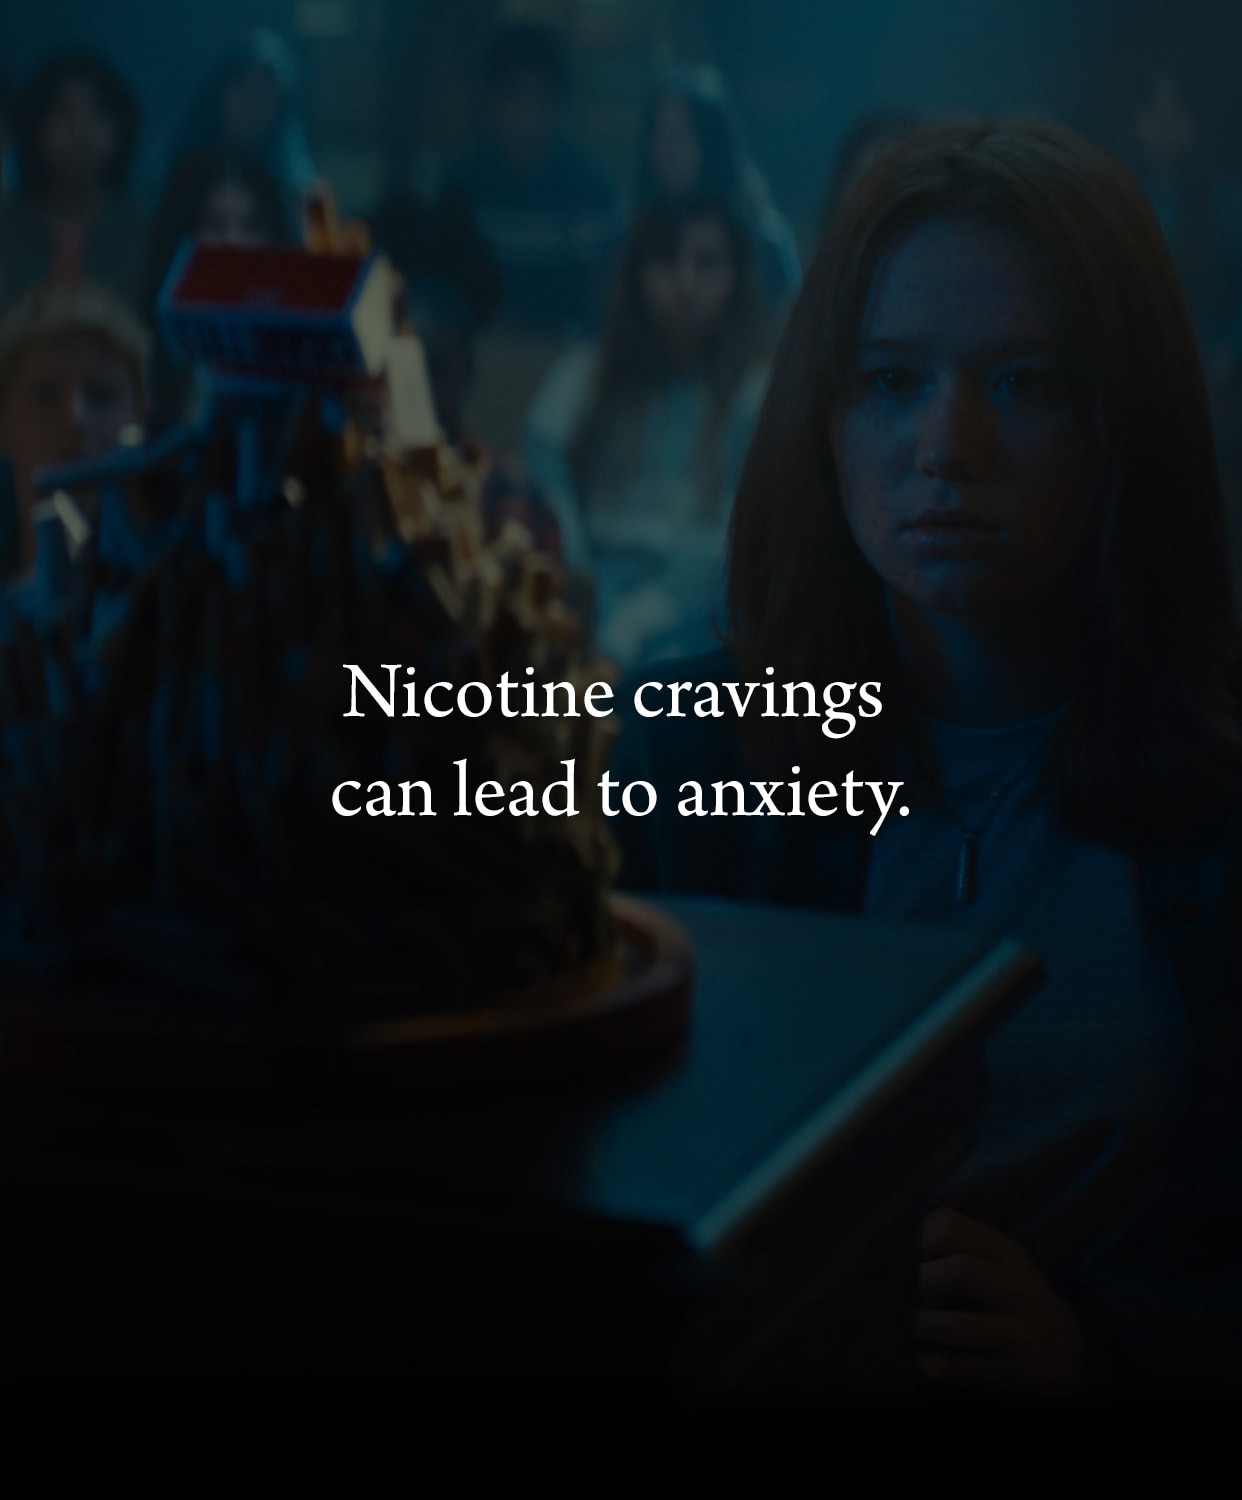 Nicotine cravings can lead to anxiety.